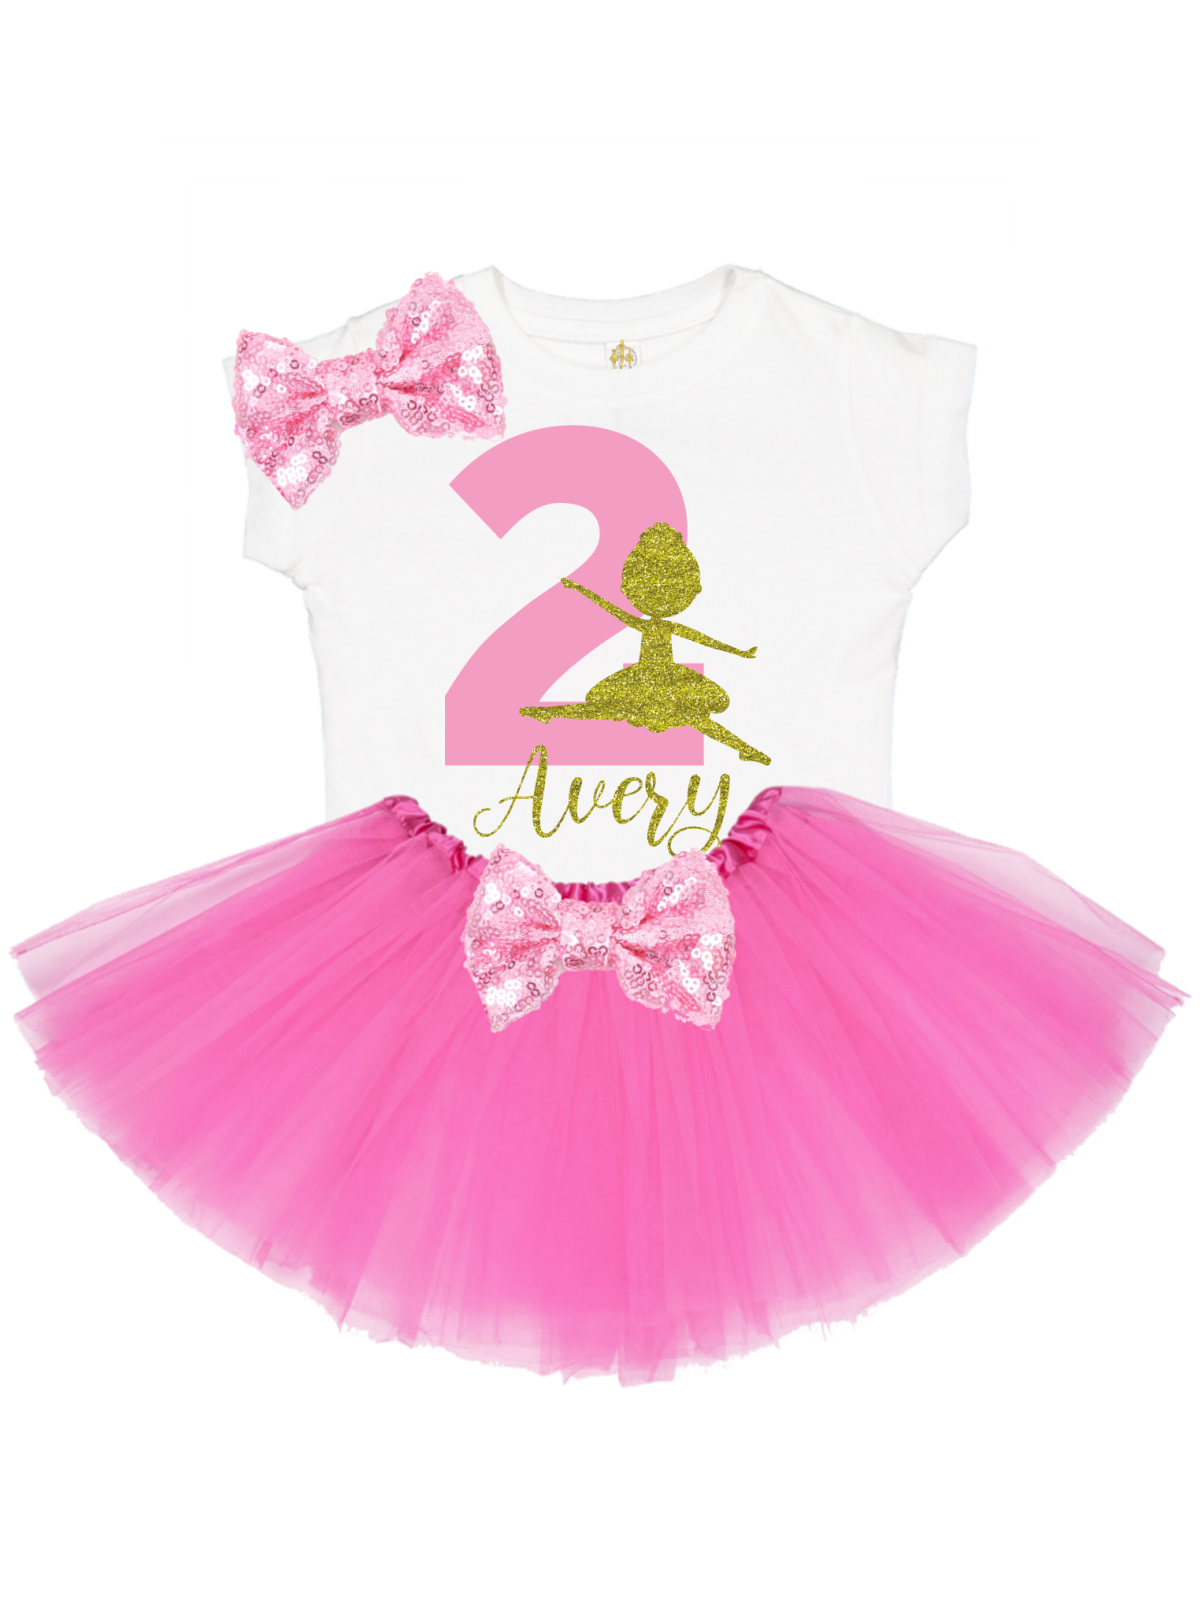 girls pink and gold ballerina tutu outfit